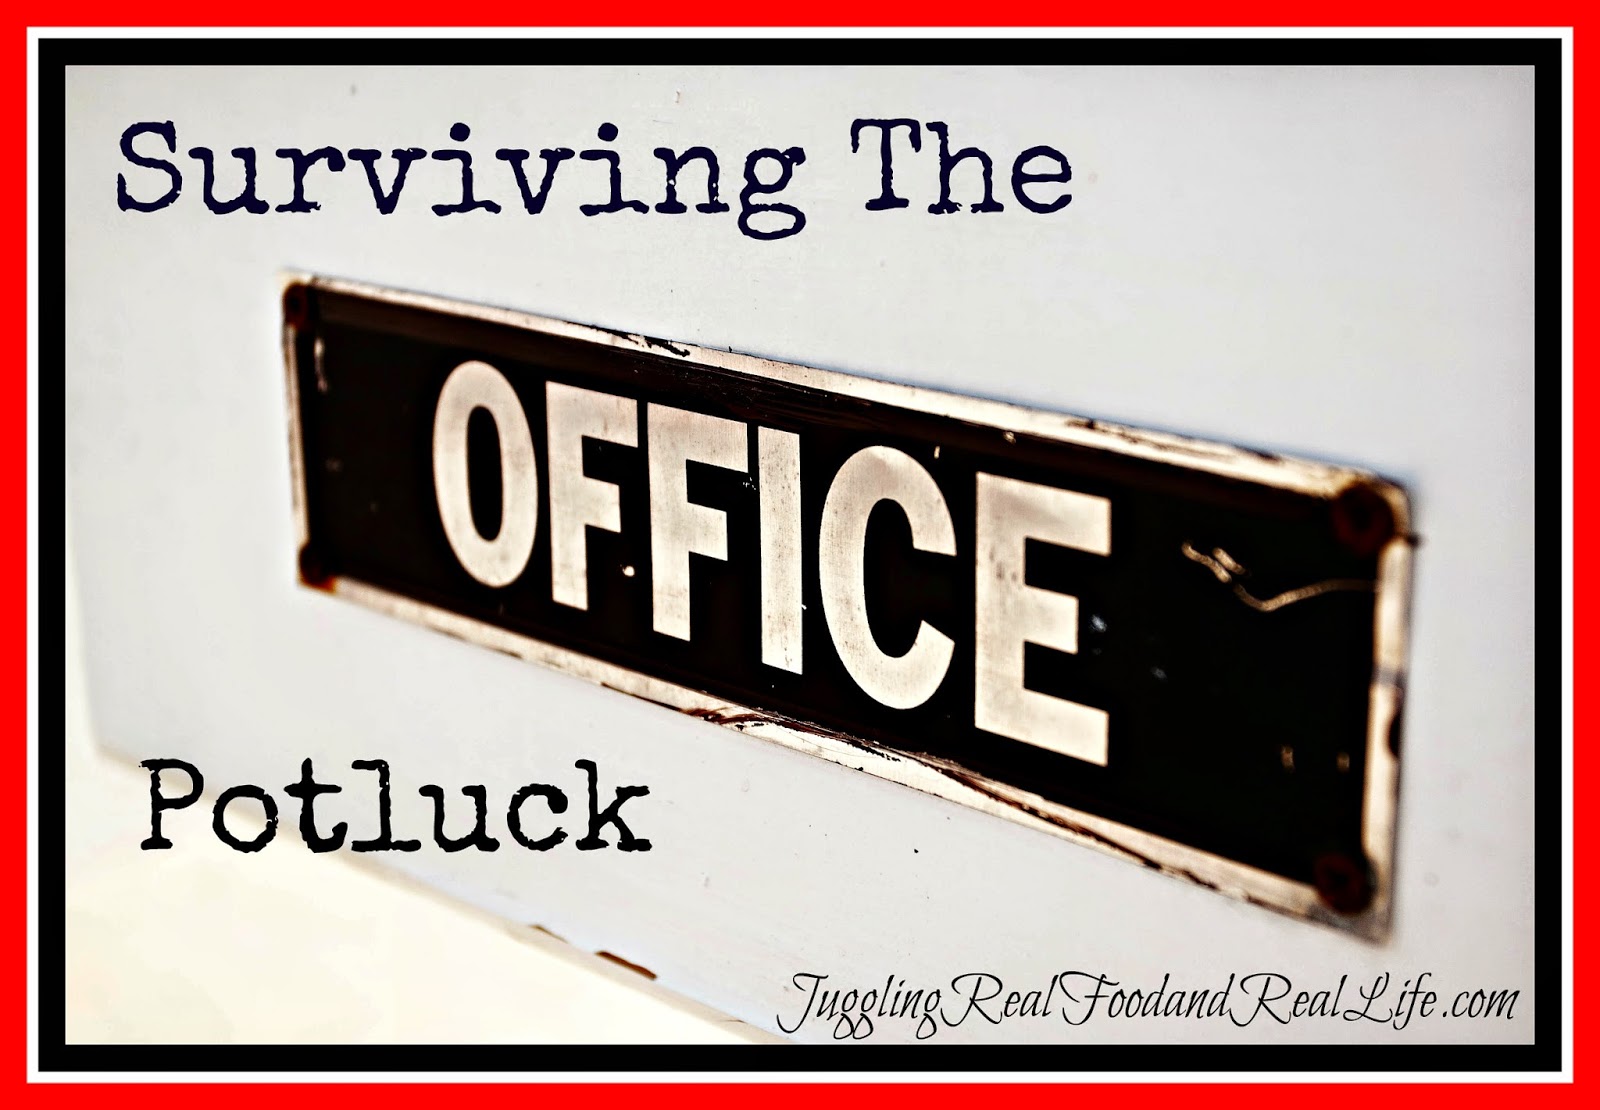 Surviving The Office Potluck